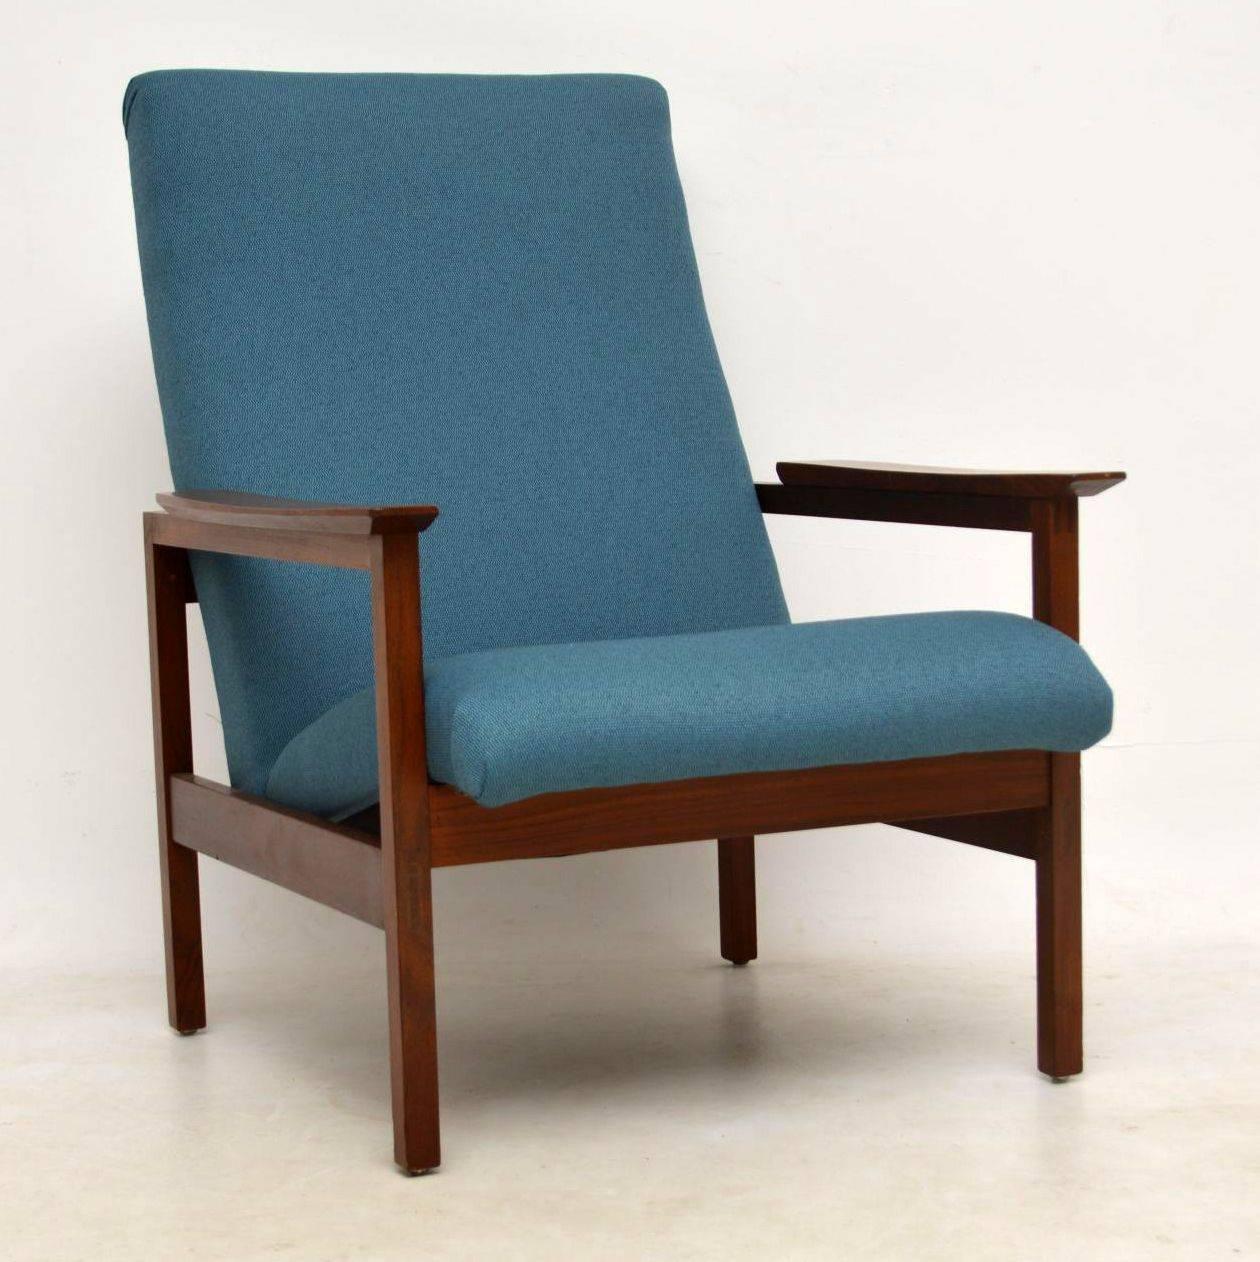 A top quality and extremely comfortable vintage armchair, this was made by Guy Rogers, it dates from the 1950s-1960s. The frame is solid Afromosia wood, it is nicely polished, clean and sturdy. We have had this fully re-upholstered in a beautiful